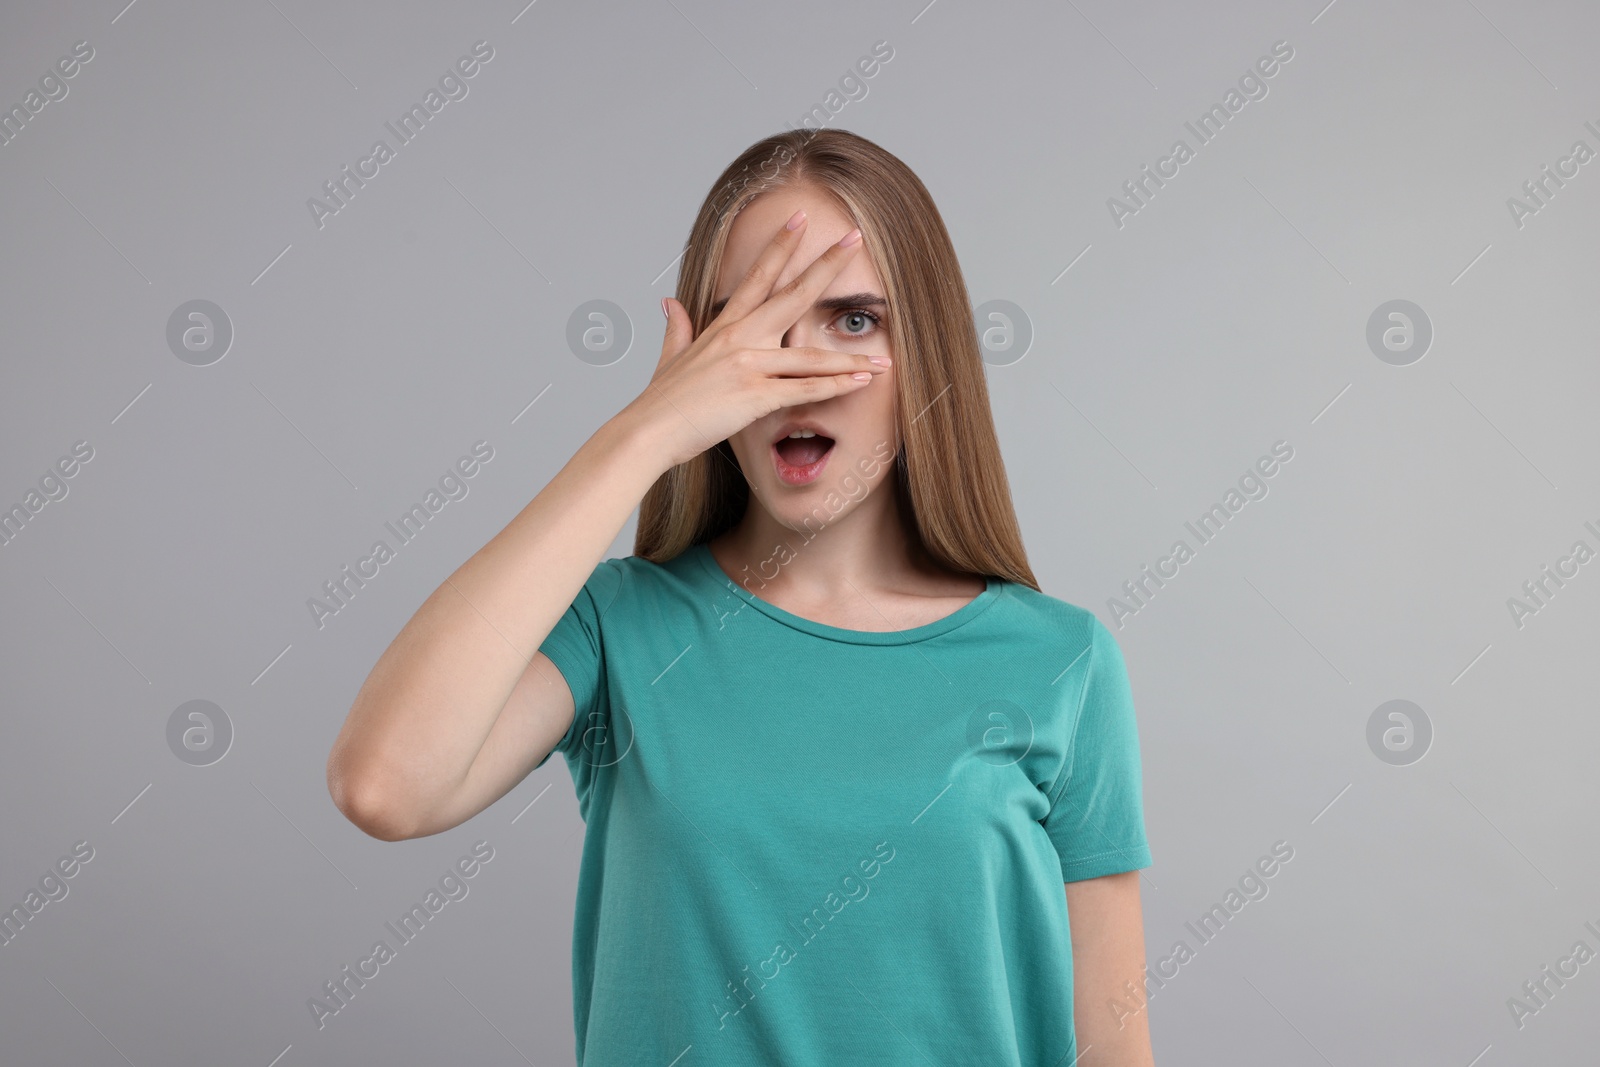 Photo of Embarrassed woman covering face with hand on grey background